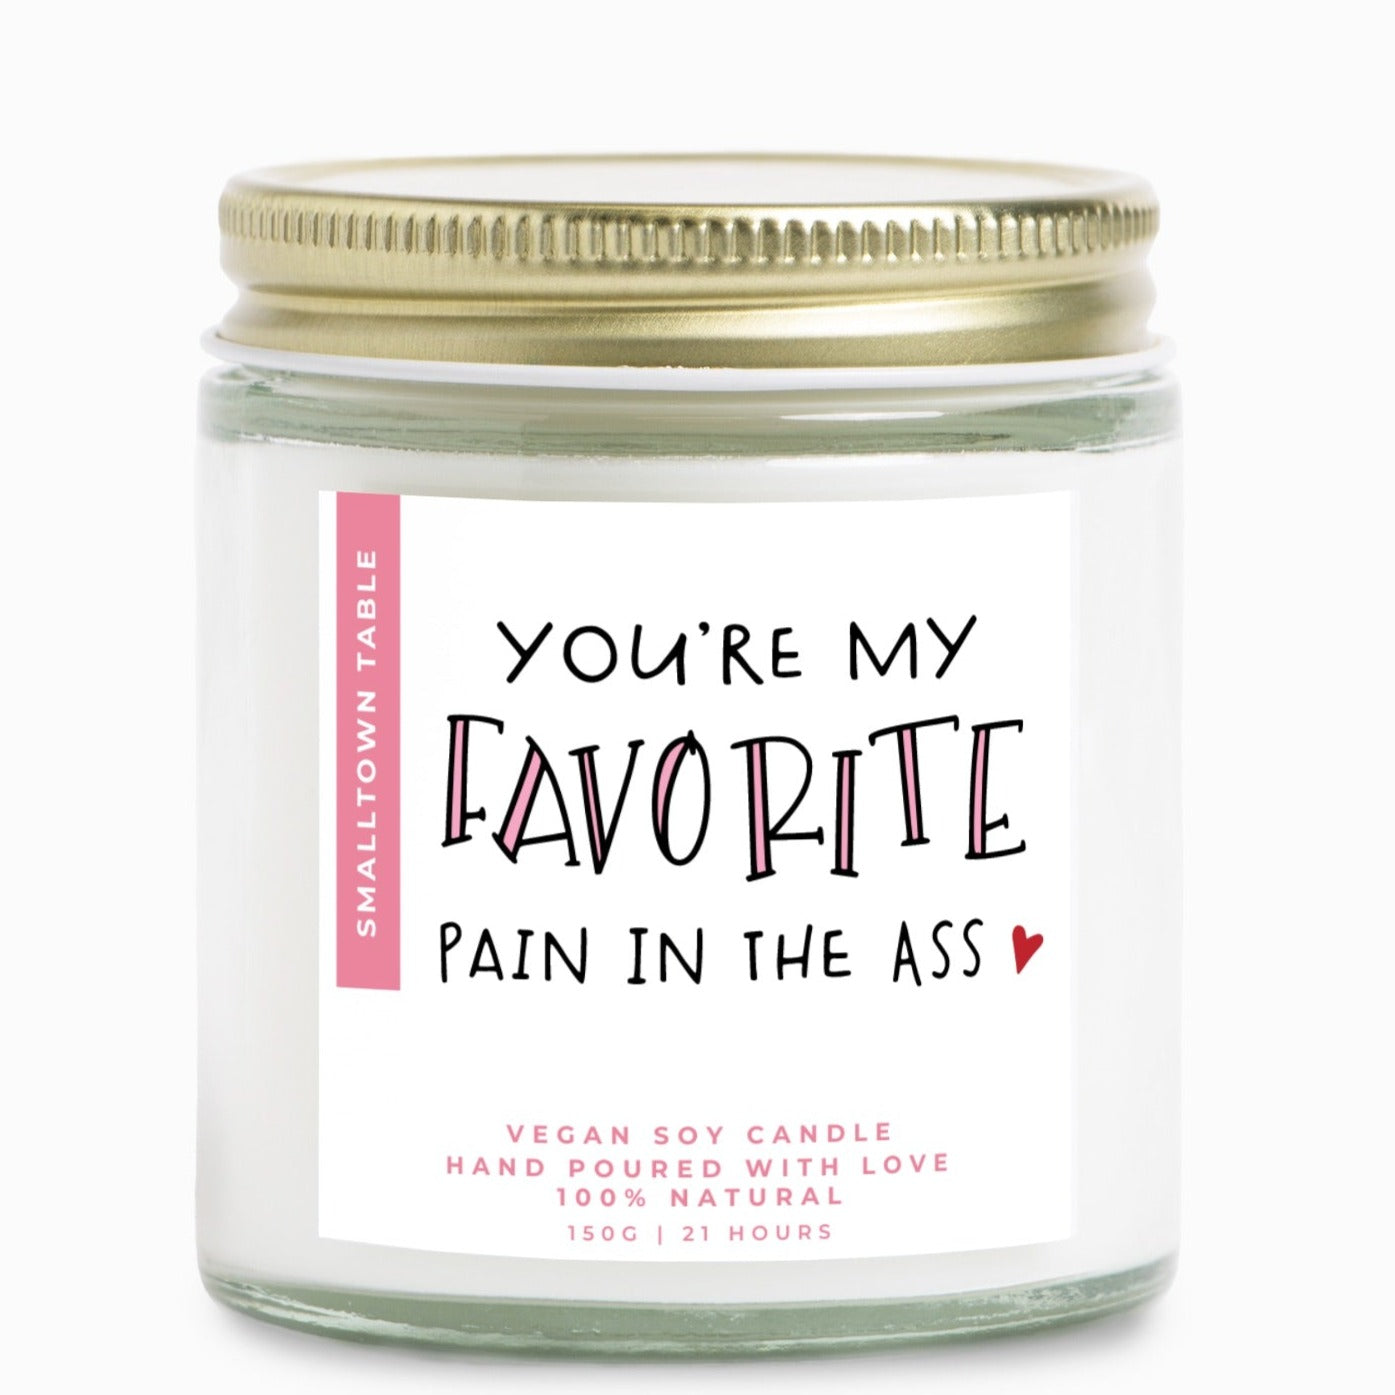 candle with gold lid, white labels that says You're my Favorite (in pink) Pain in the ass followed by a small red heart